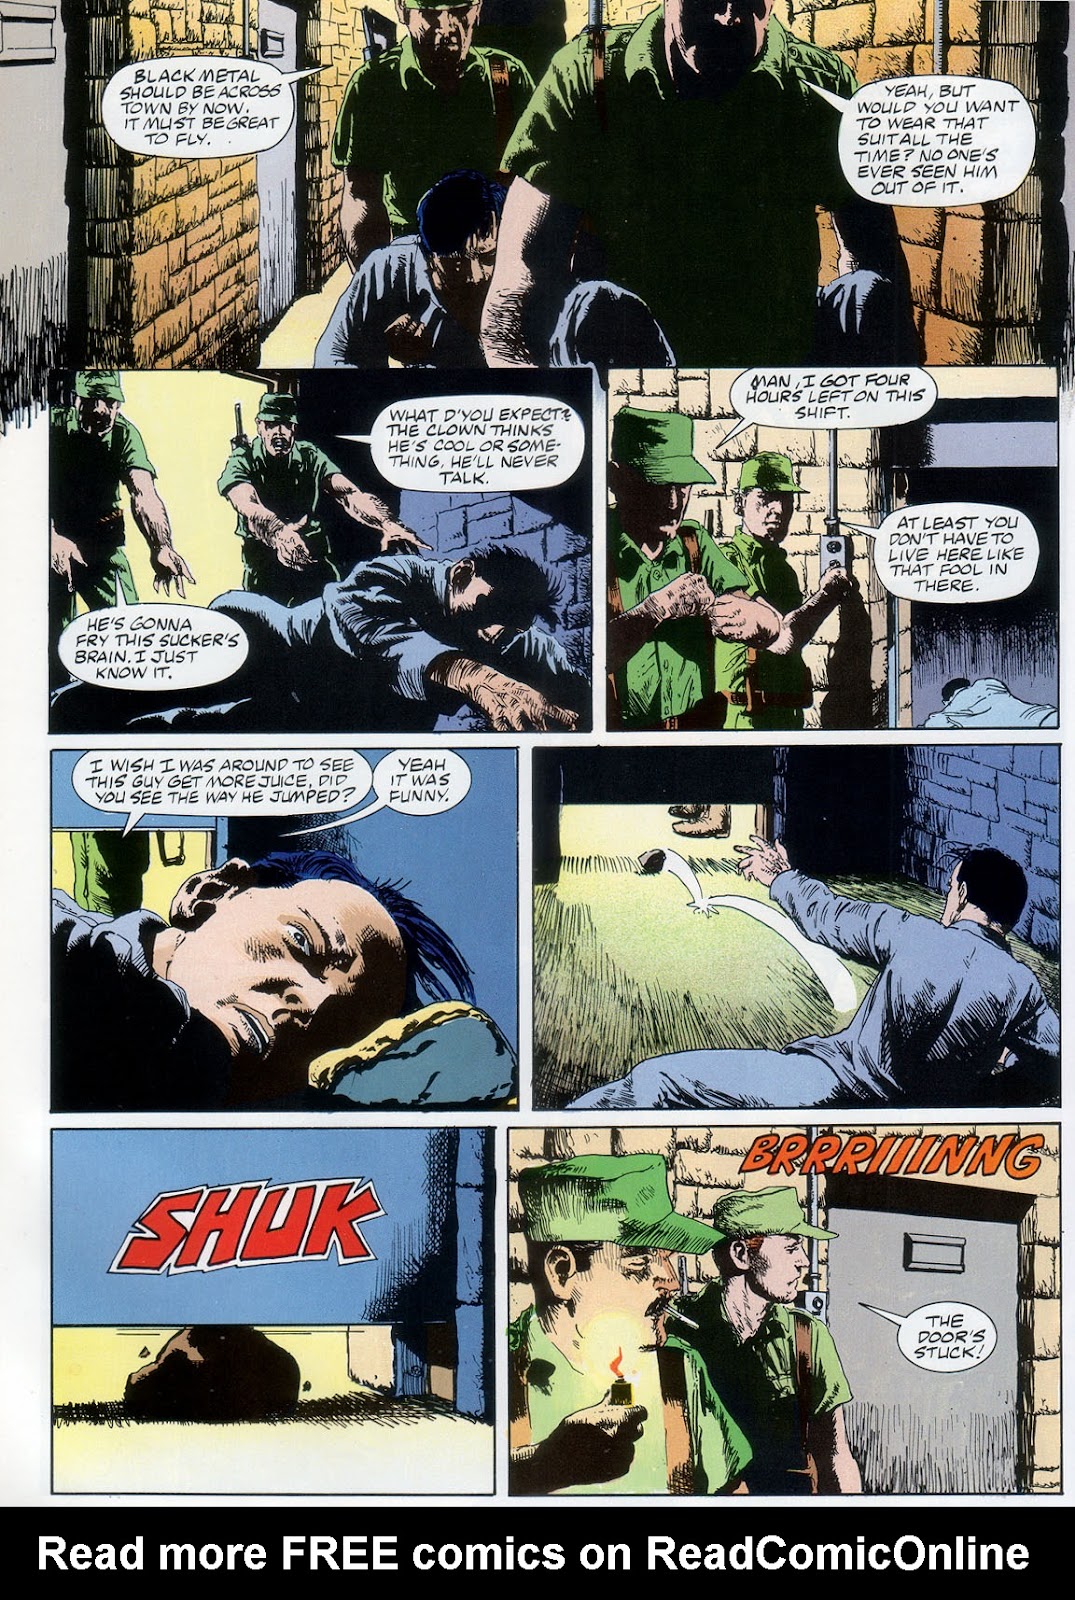 Marvel Graphic Novel issue 57 - Rick Mason - The Agent - Page 62